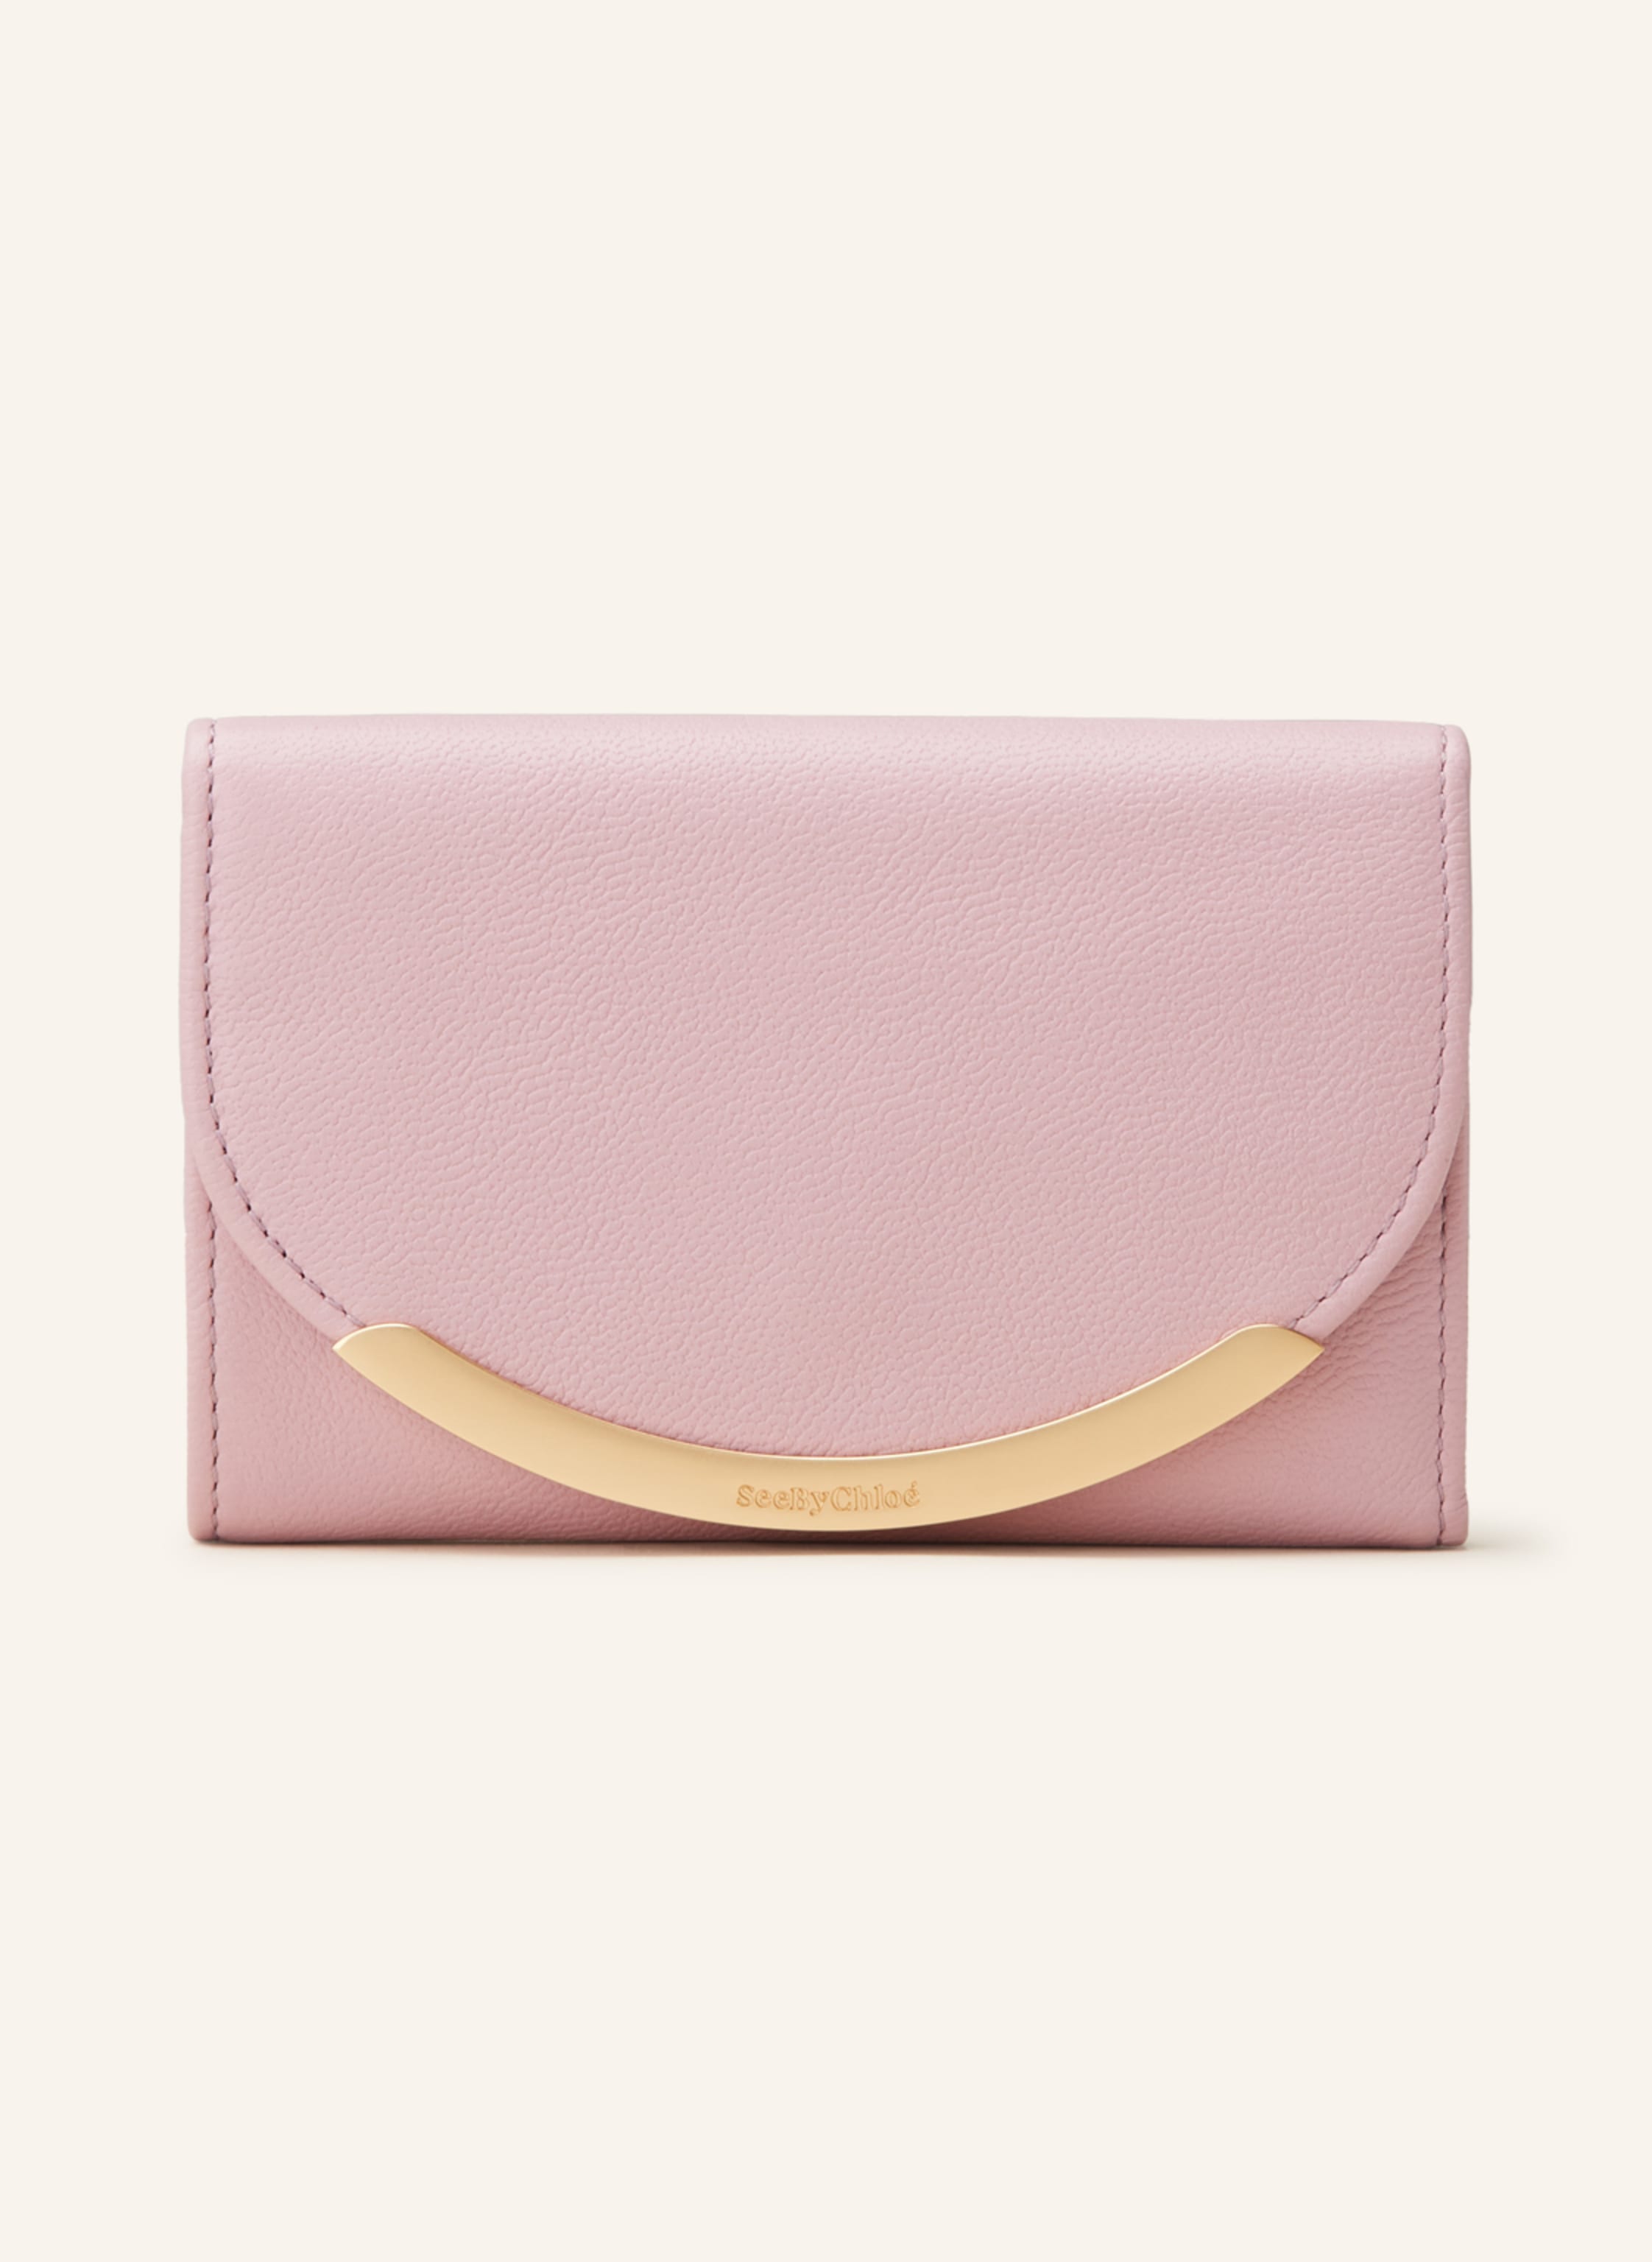 Patrizia Pepe women's card holder with applied logo Lilac